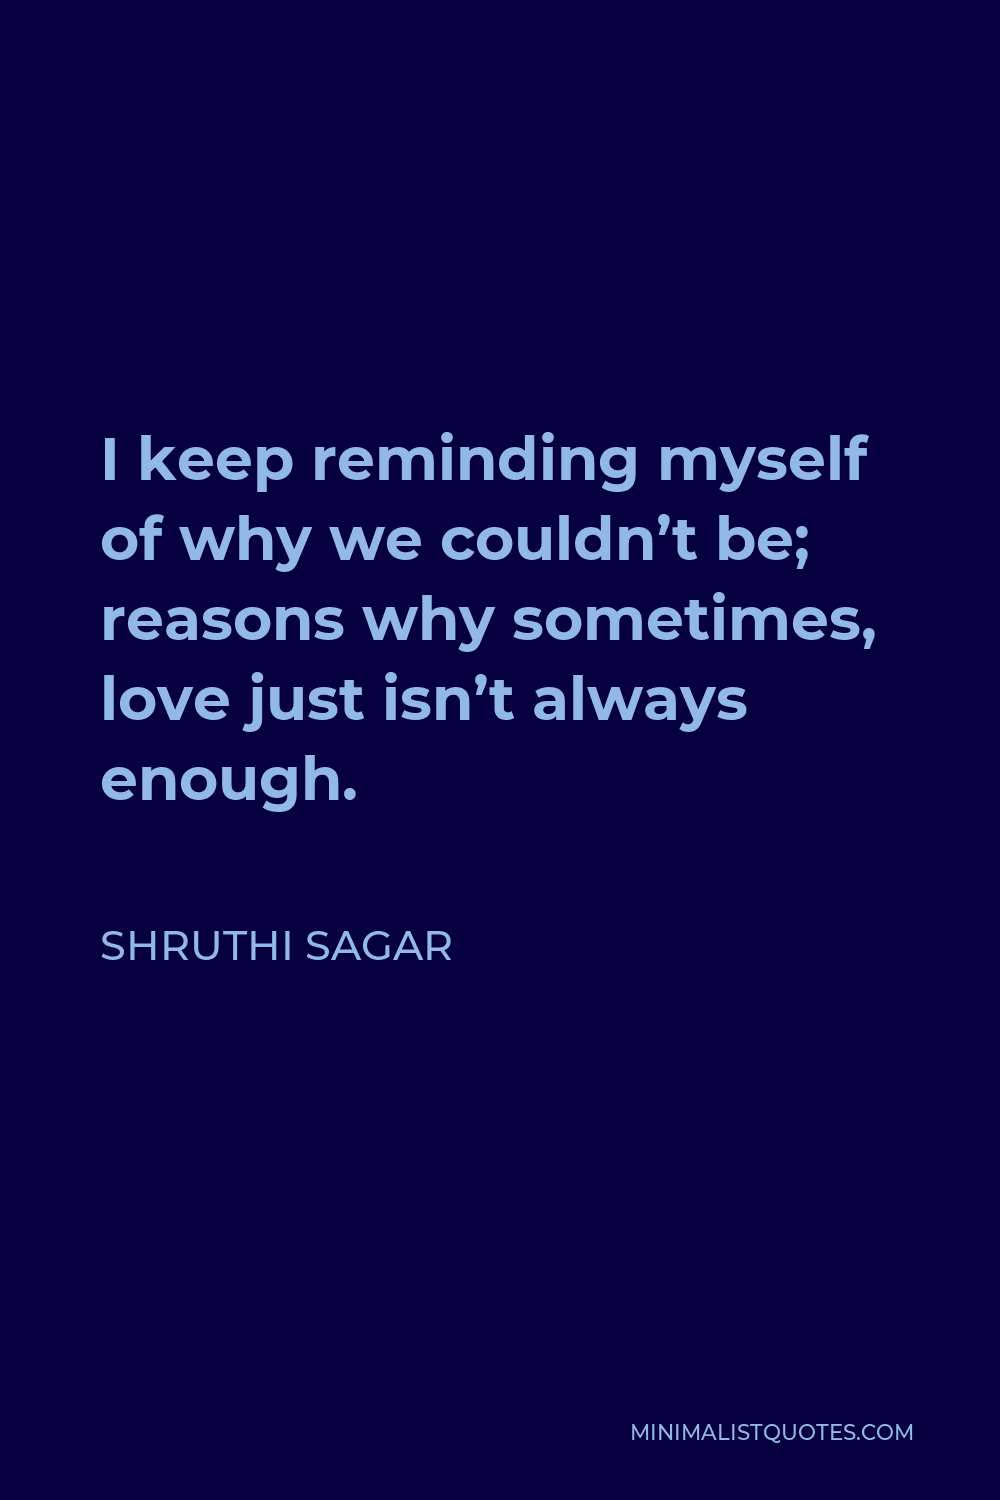 Shruthi Sagar Quote - I keep reminding myself of why we couldn’t be; reasons why sometimes, love just isn’t always enough.